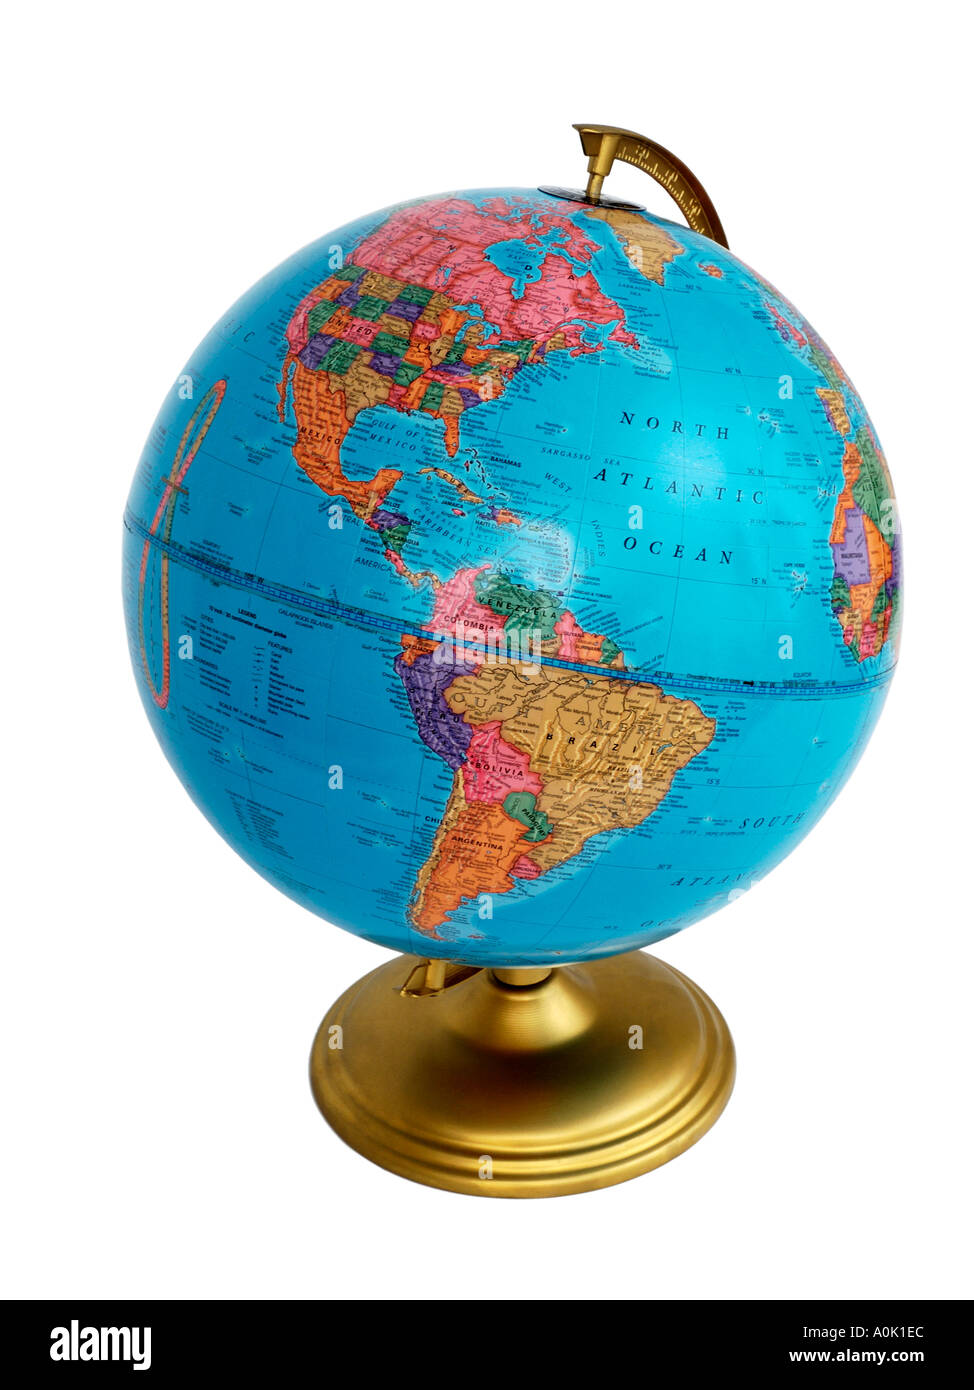 Globe showing North America and South America Stock Photo